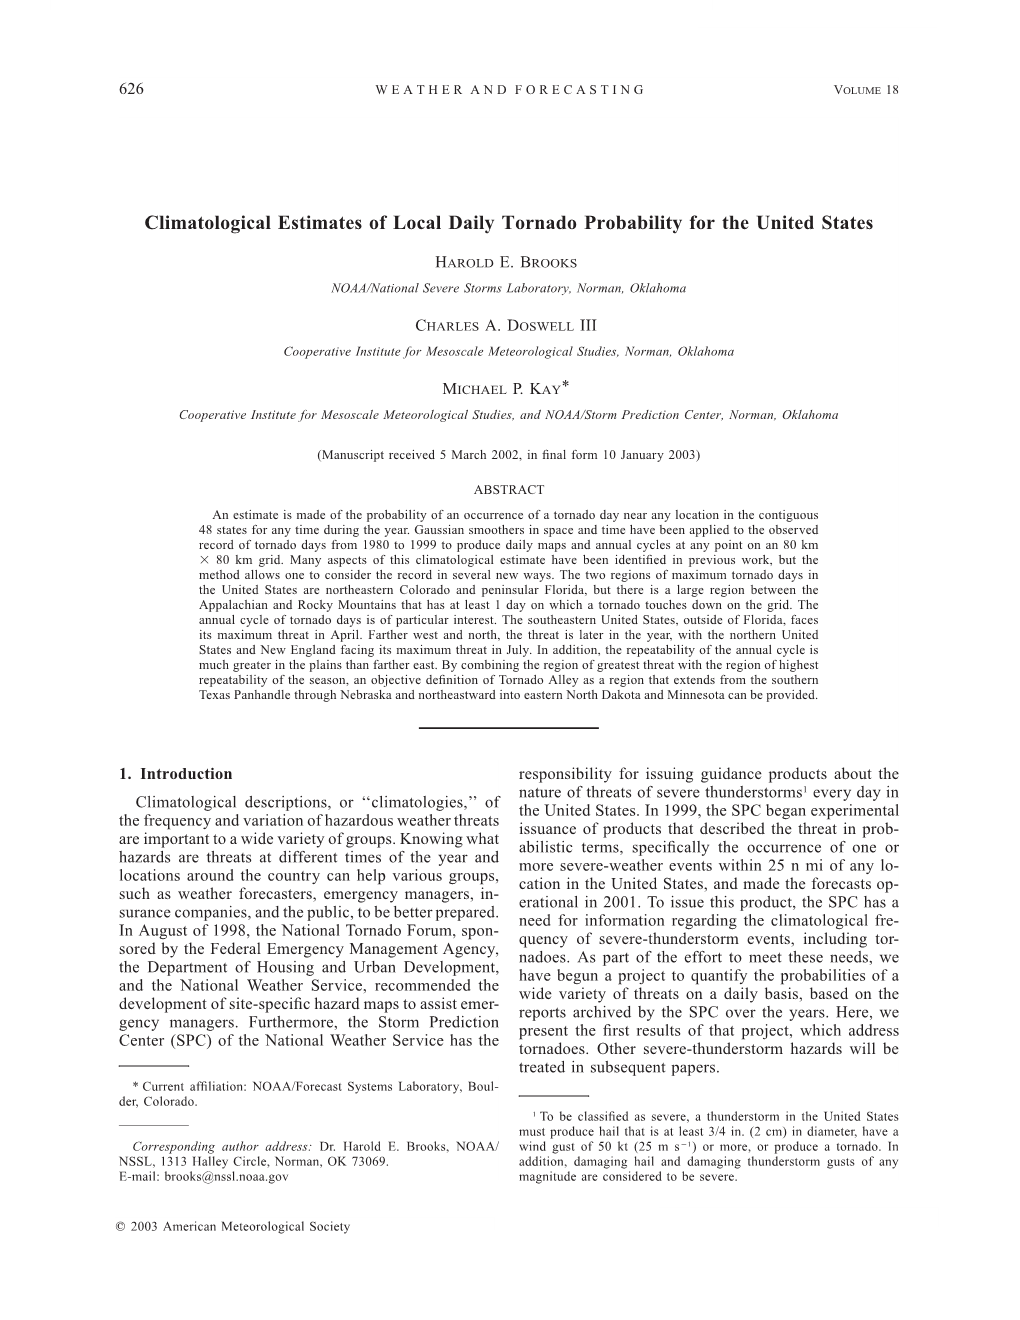 Climatological Estimates of Local Daily Tornado Probability for the United States